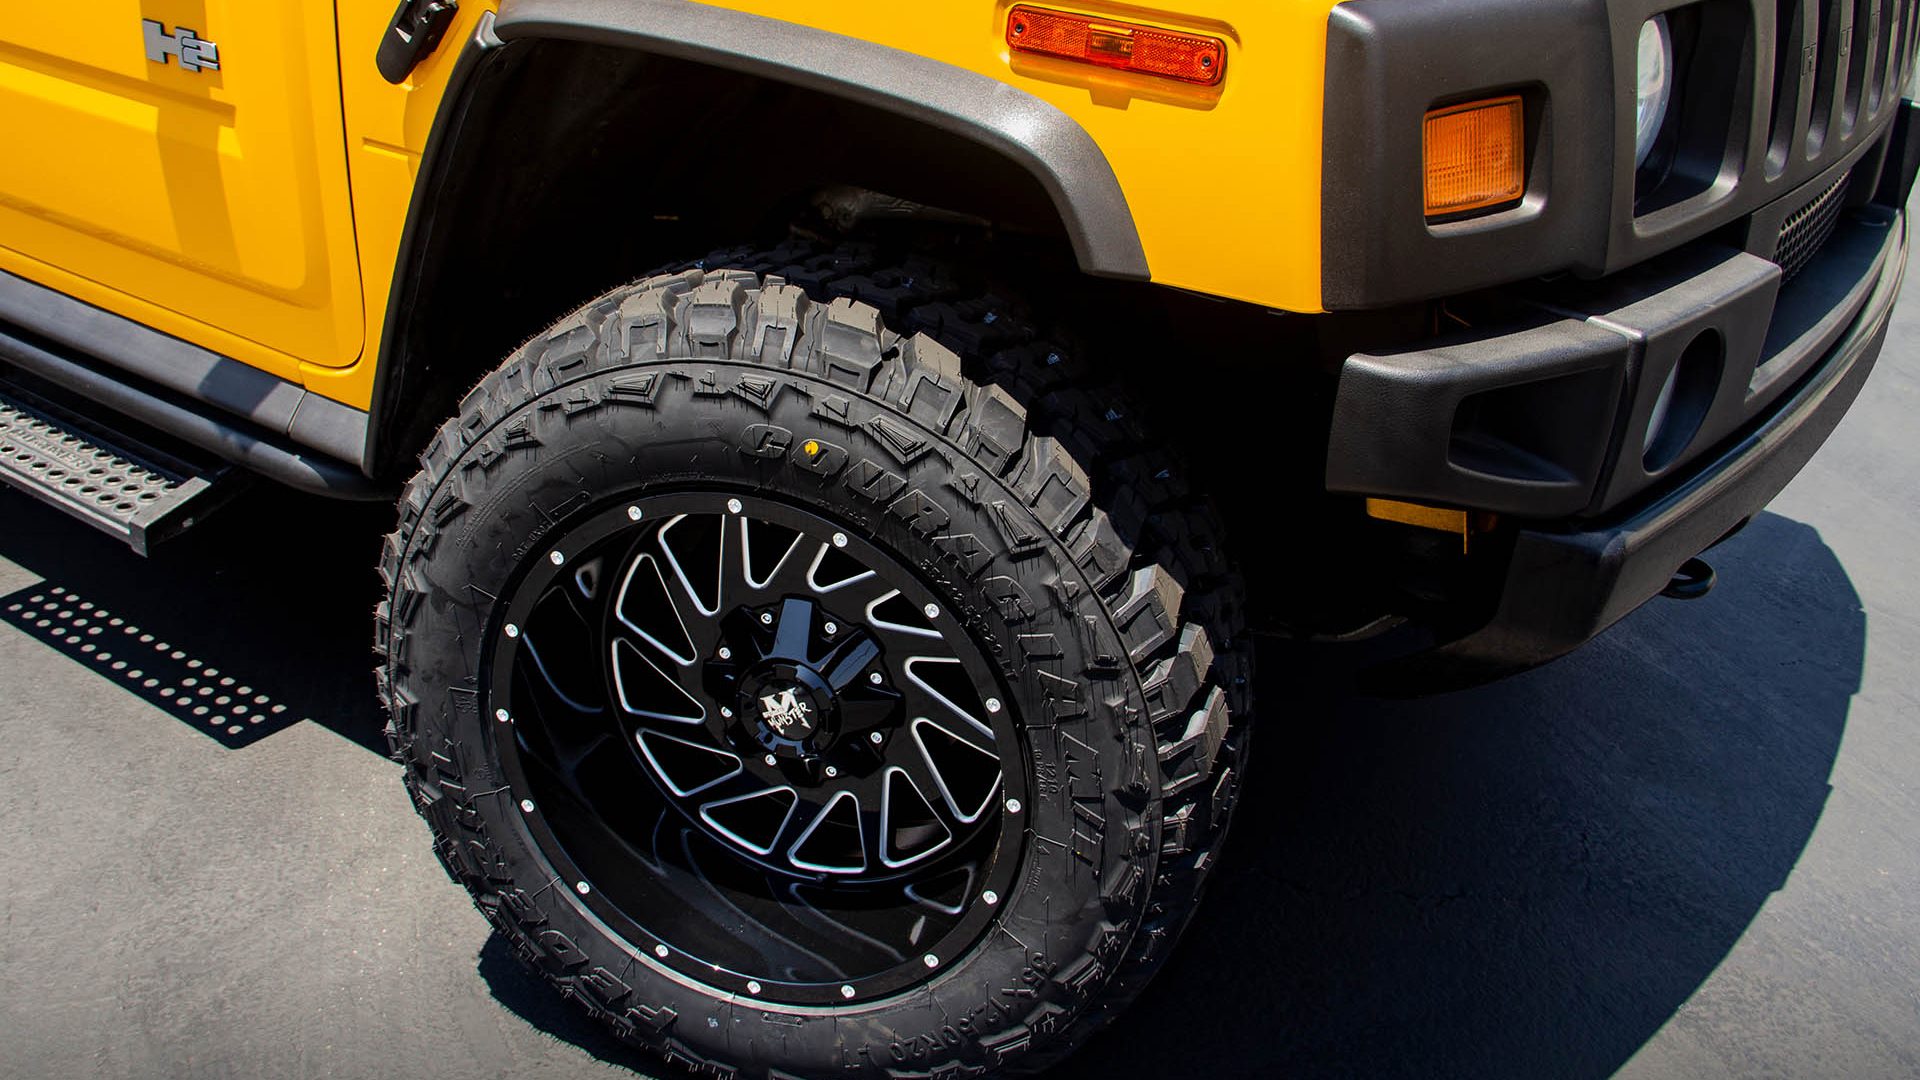 M12 OffRoad Monster Wheels on a Hummer H2